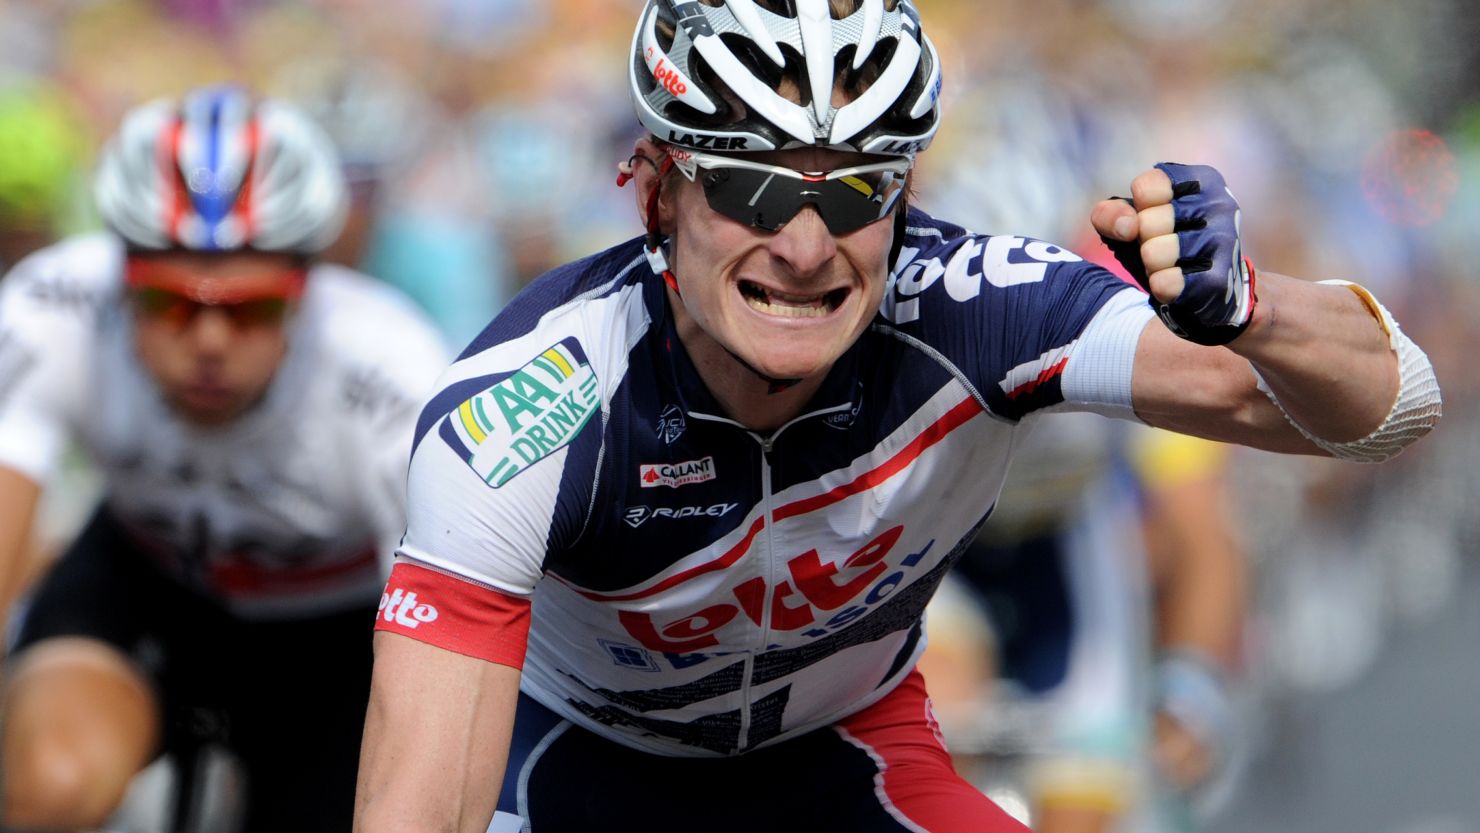 Greipel holds off Sagan for third stage win as Wiggins keeps yellow | CNN